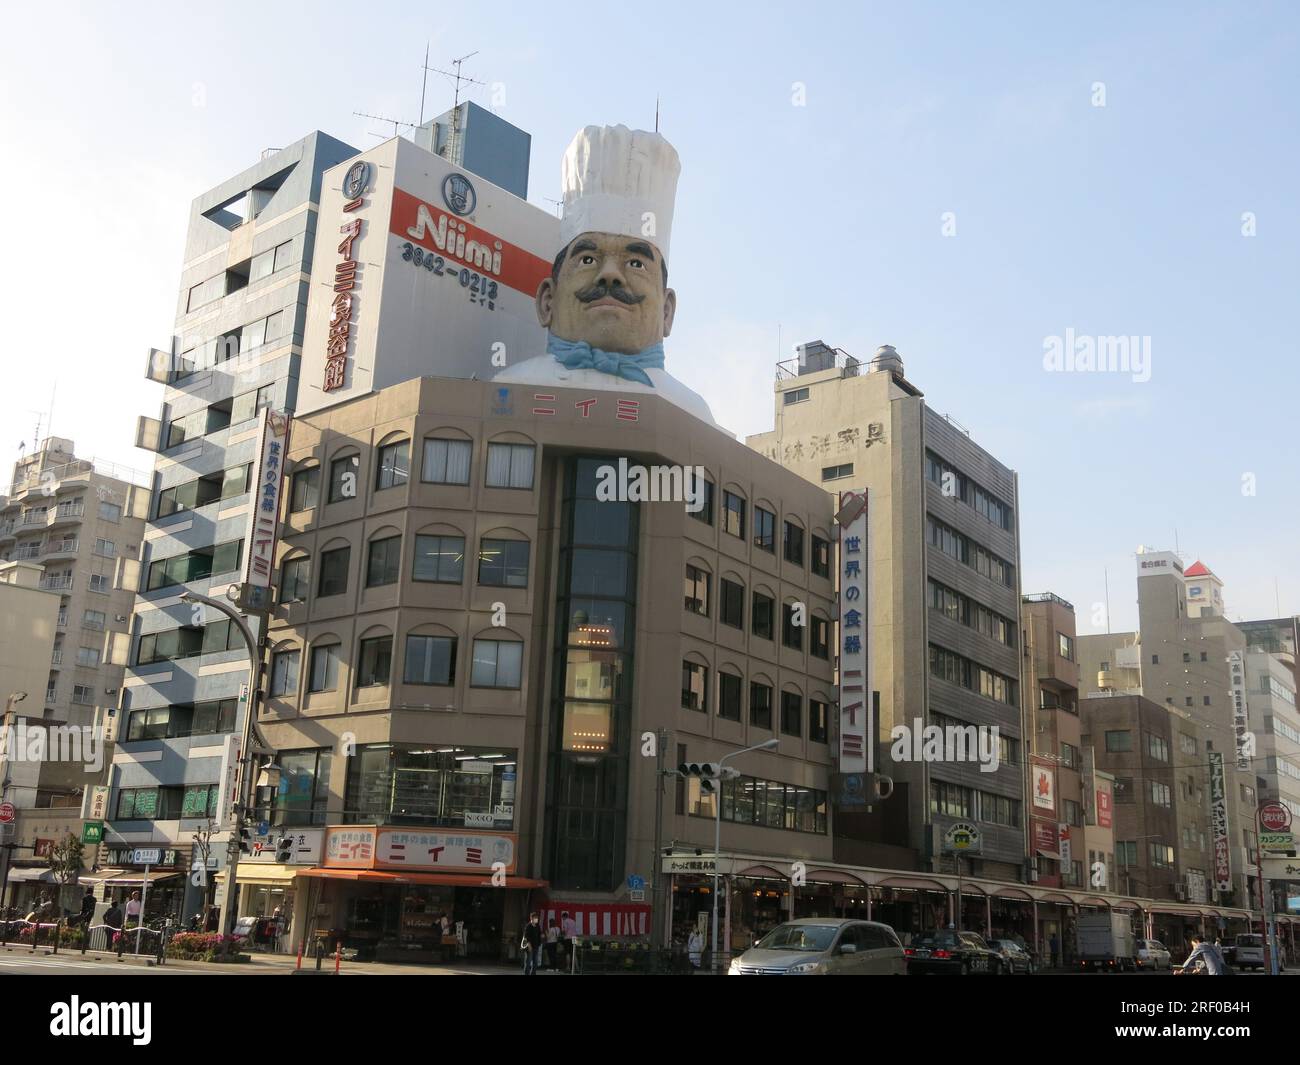 An off-beat tourist destination, view of the southern end of Kappabashi-dori with a model chef & giant teacups signifying 'Kitchen Street'. Stock Photo